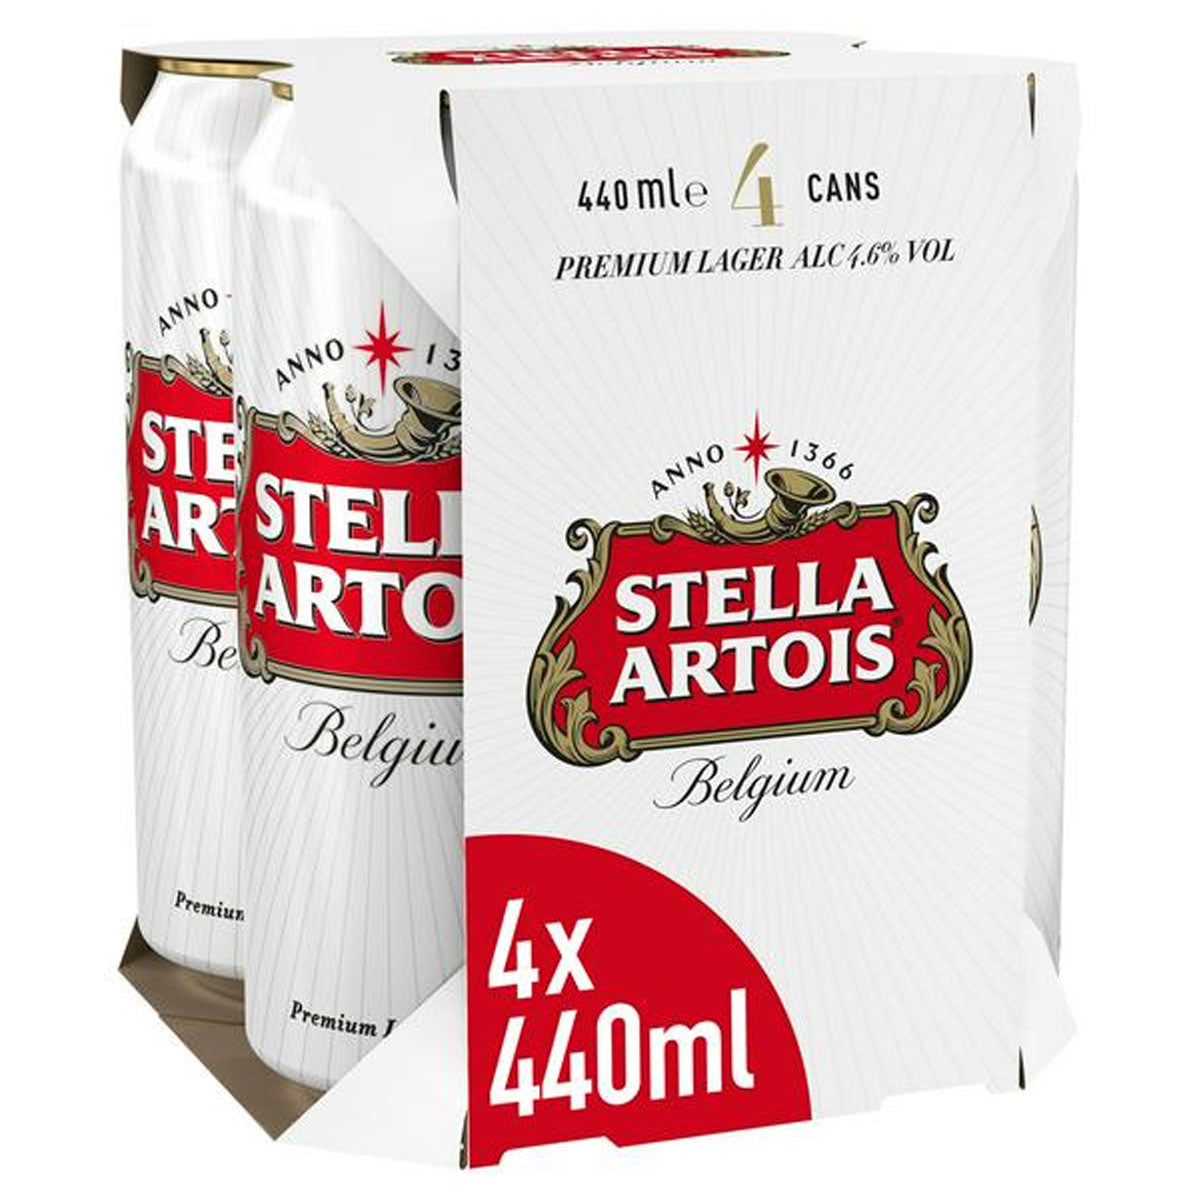 Four cans of Stella Artois - Premium Lager Beer (4.6% ABV) - 4 x 440ml in a box.